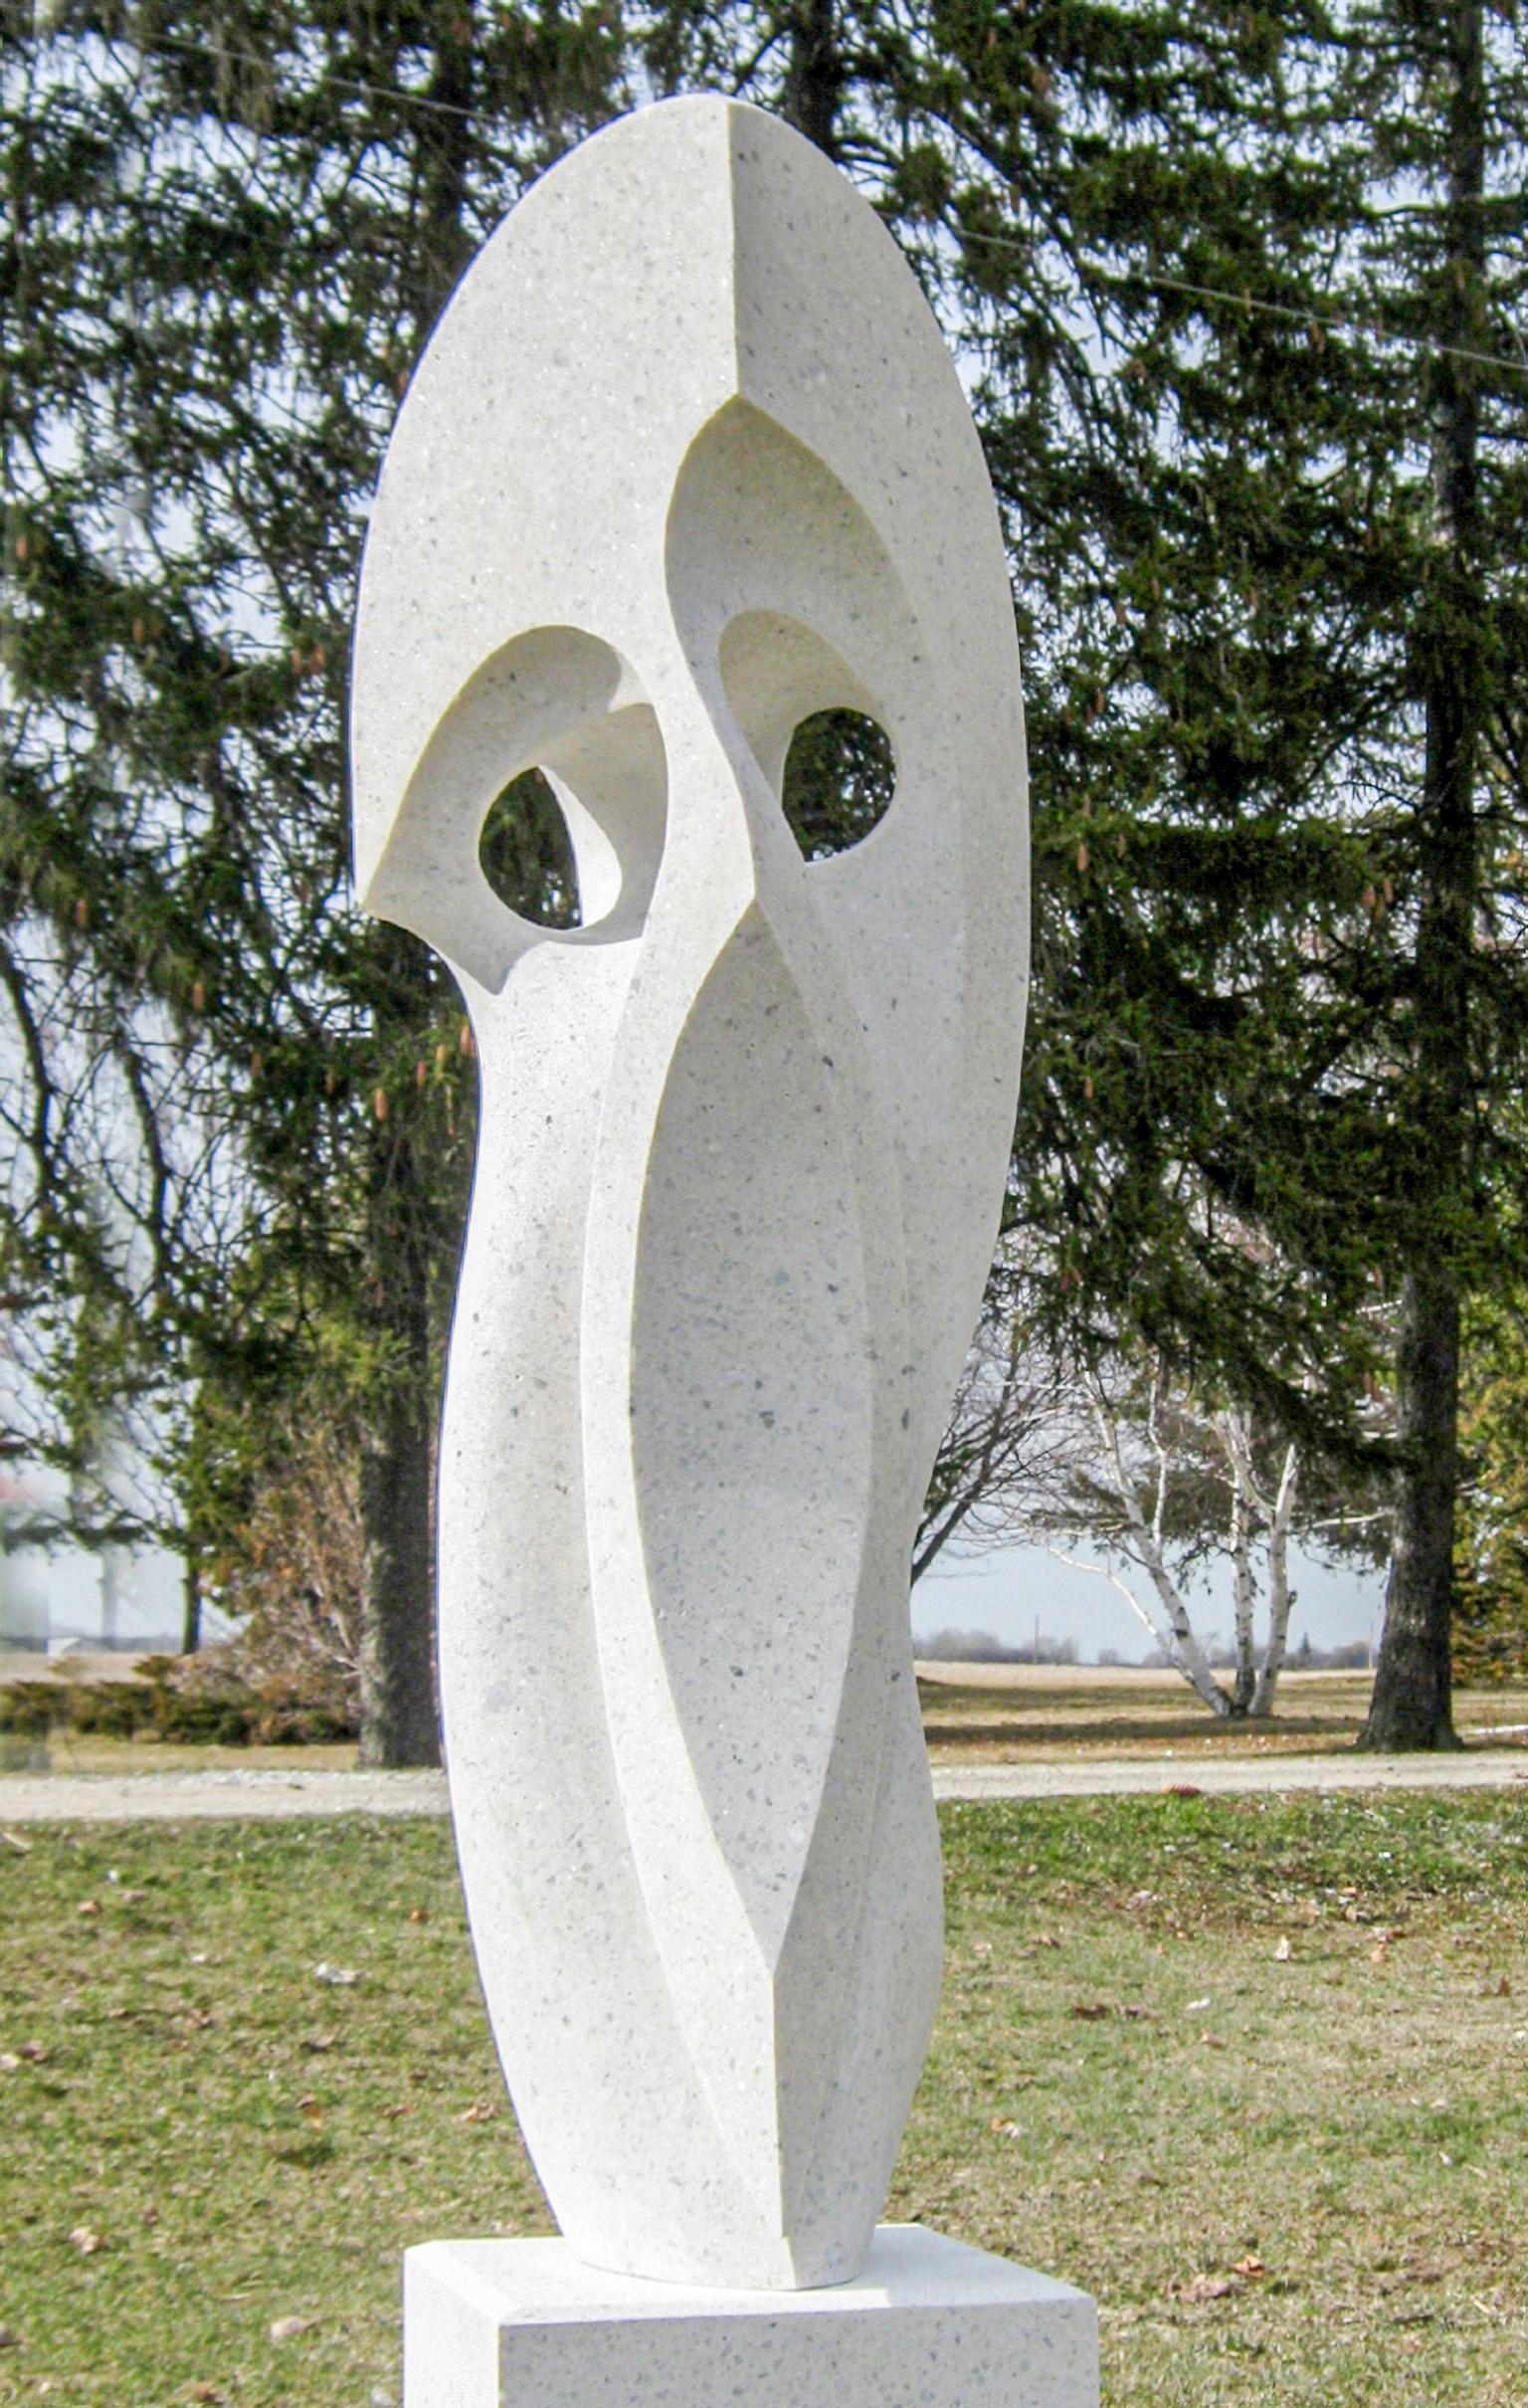 Curved Space 48 - large, smooth, abstract, outdoor, white marble sculpture - Sculpture by Jeremy Guy